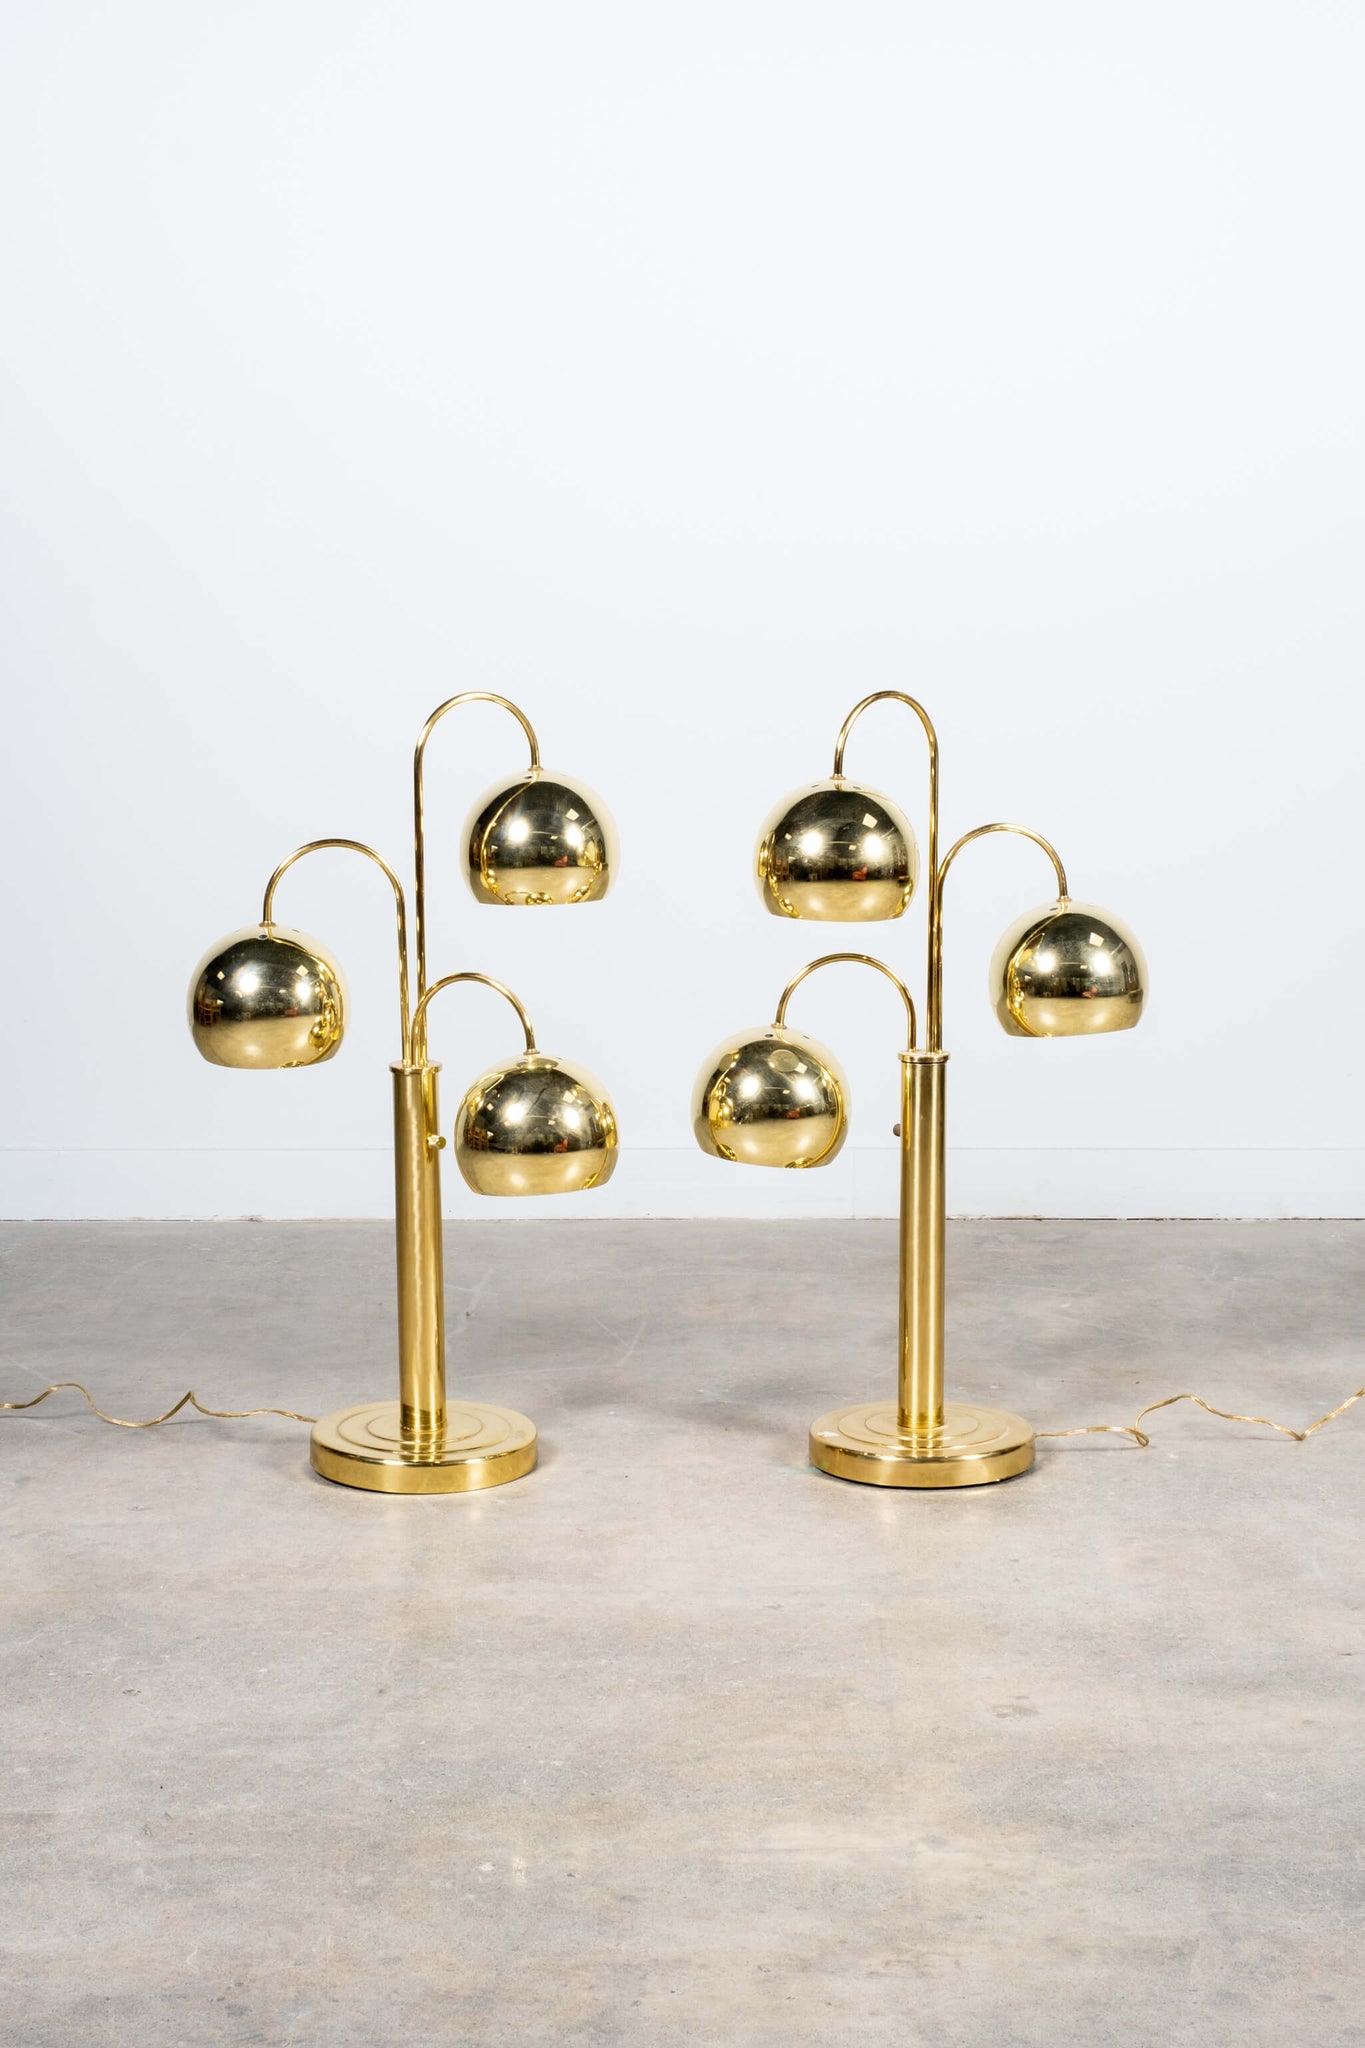 Pair of Vintage Brass Ball Eyeball Table Lamps by Robert Sonneman, shown side by side